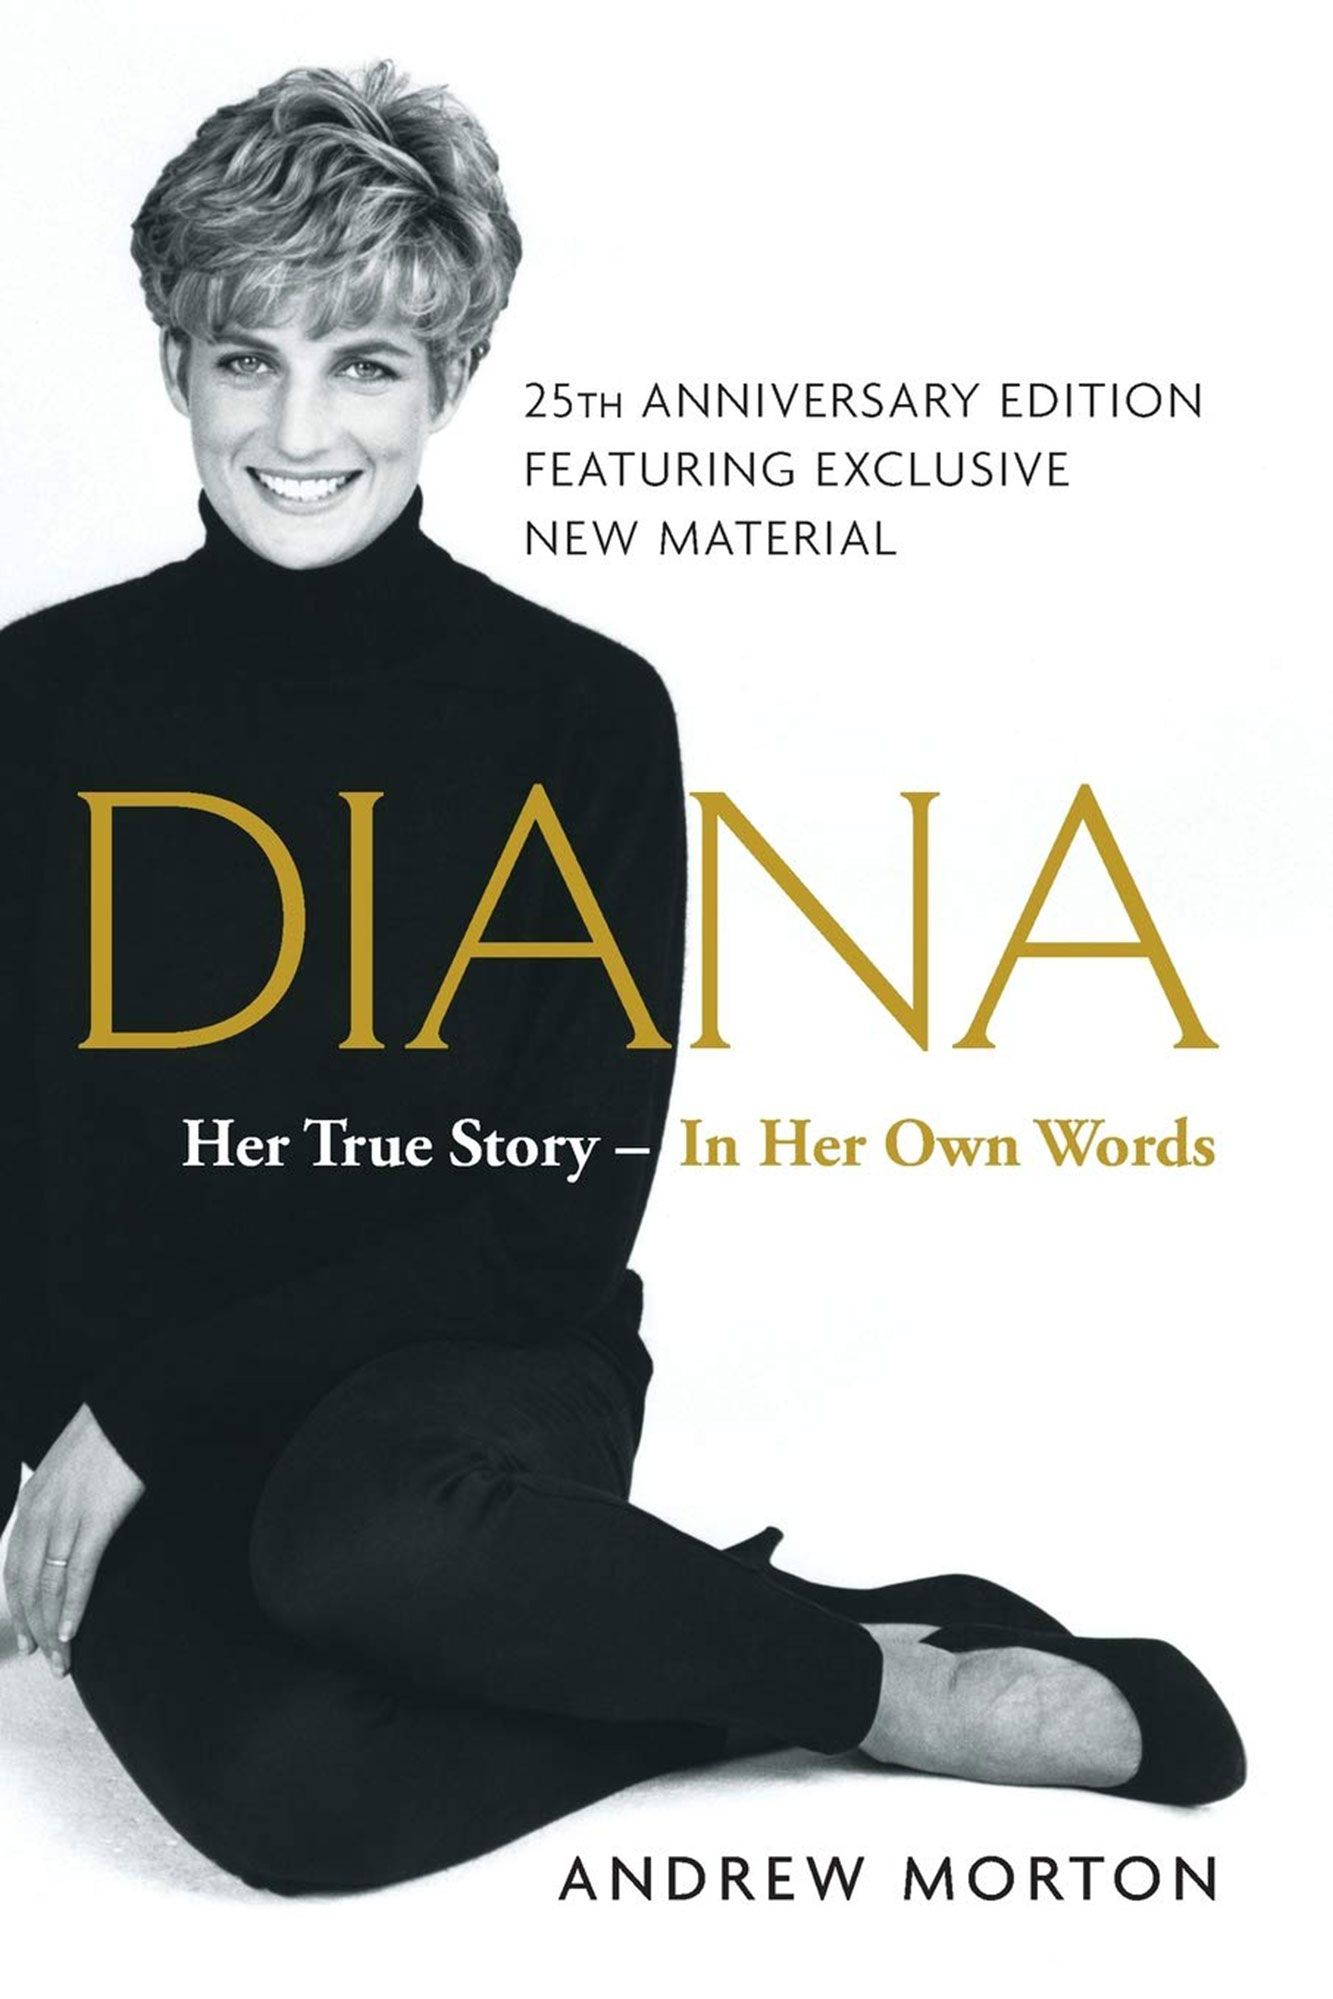 Diana: Her True Story by Andrew Morton